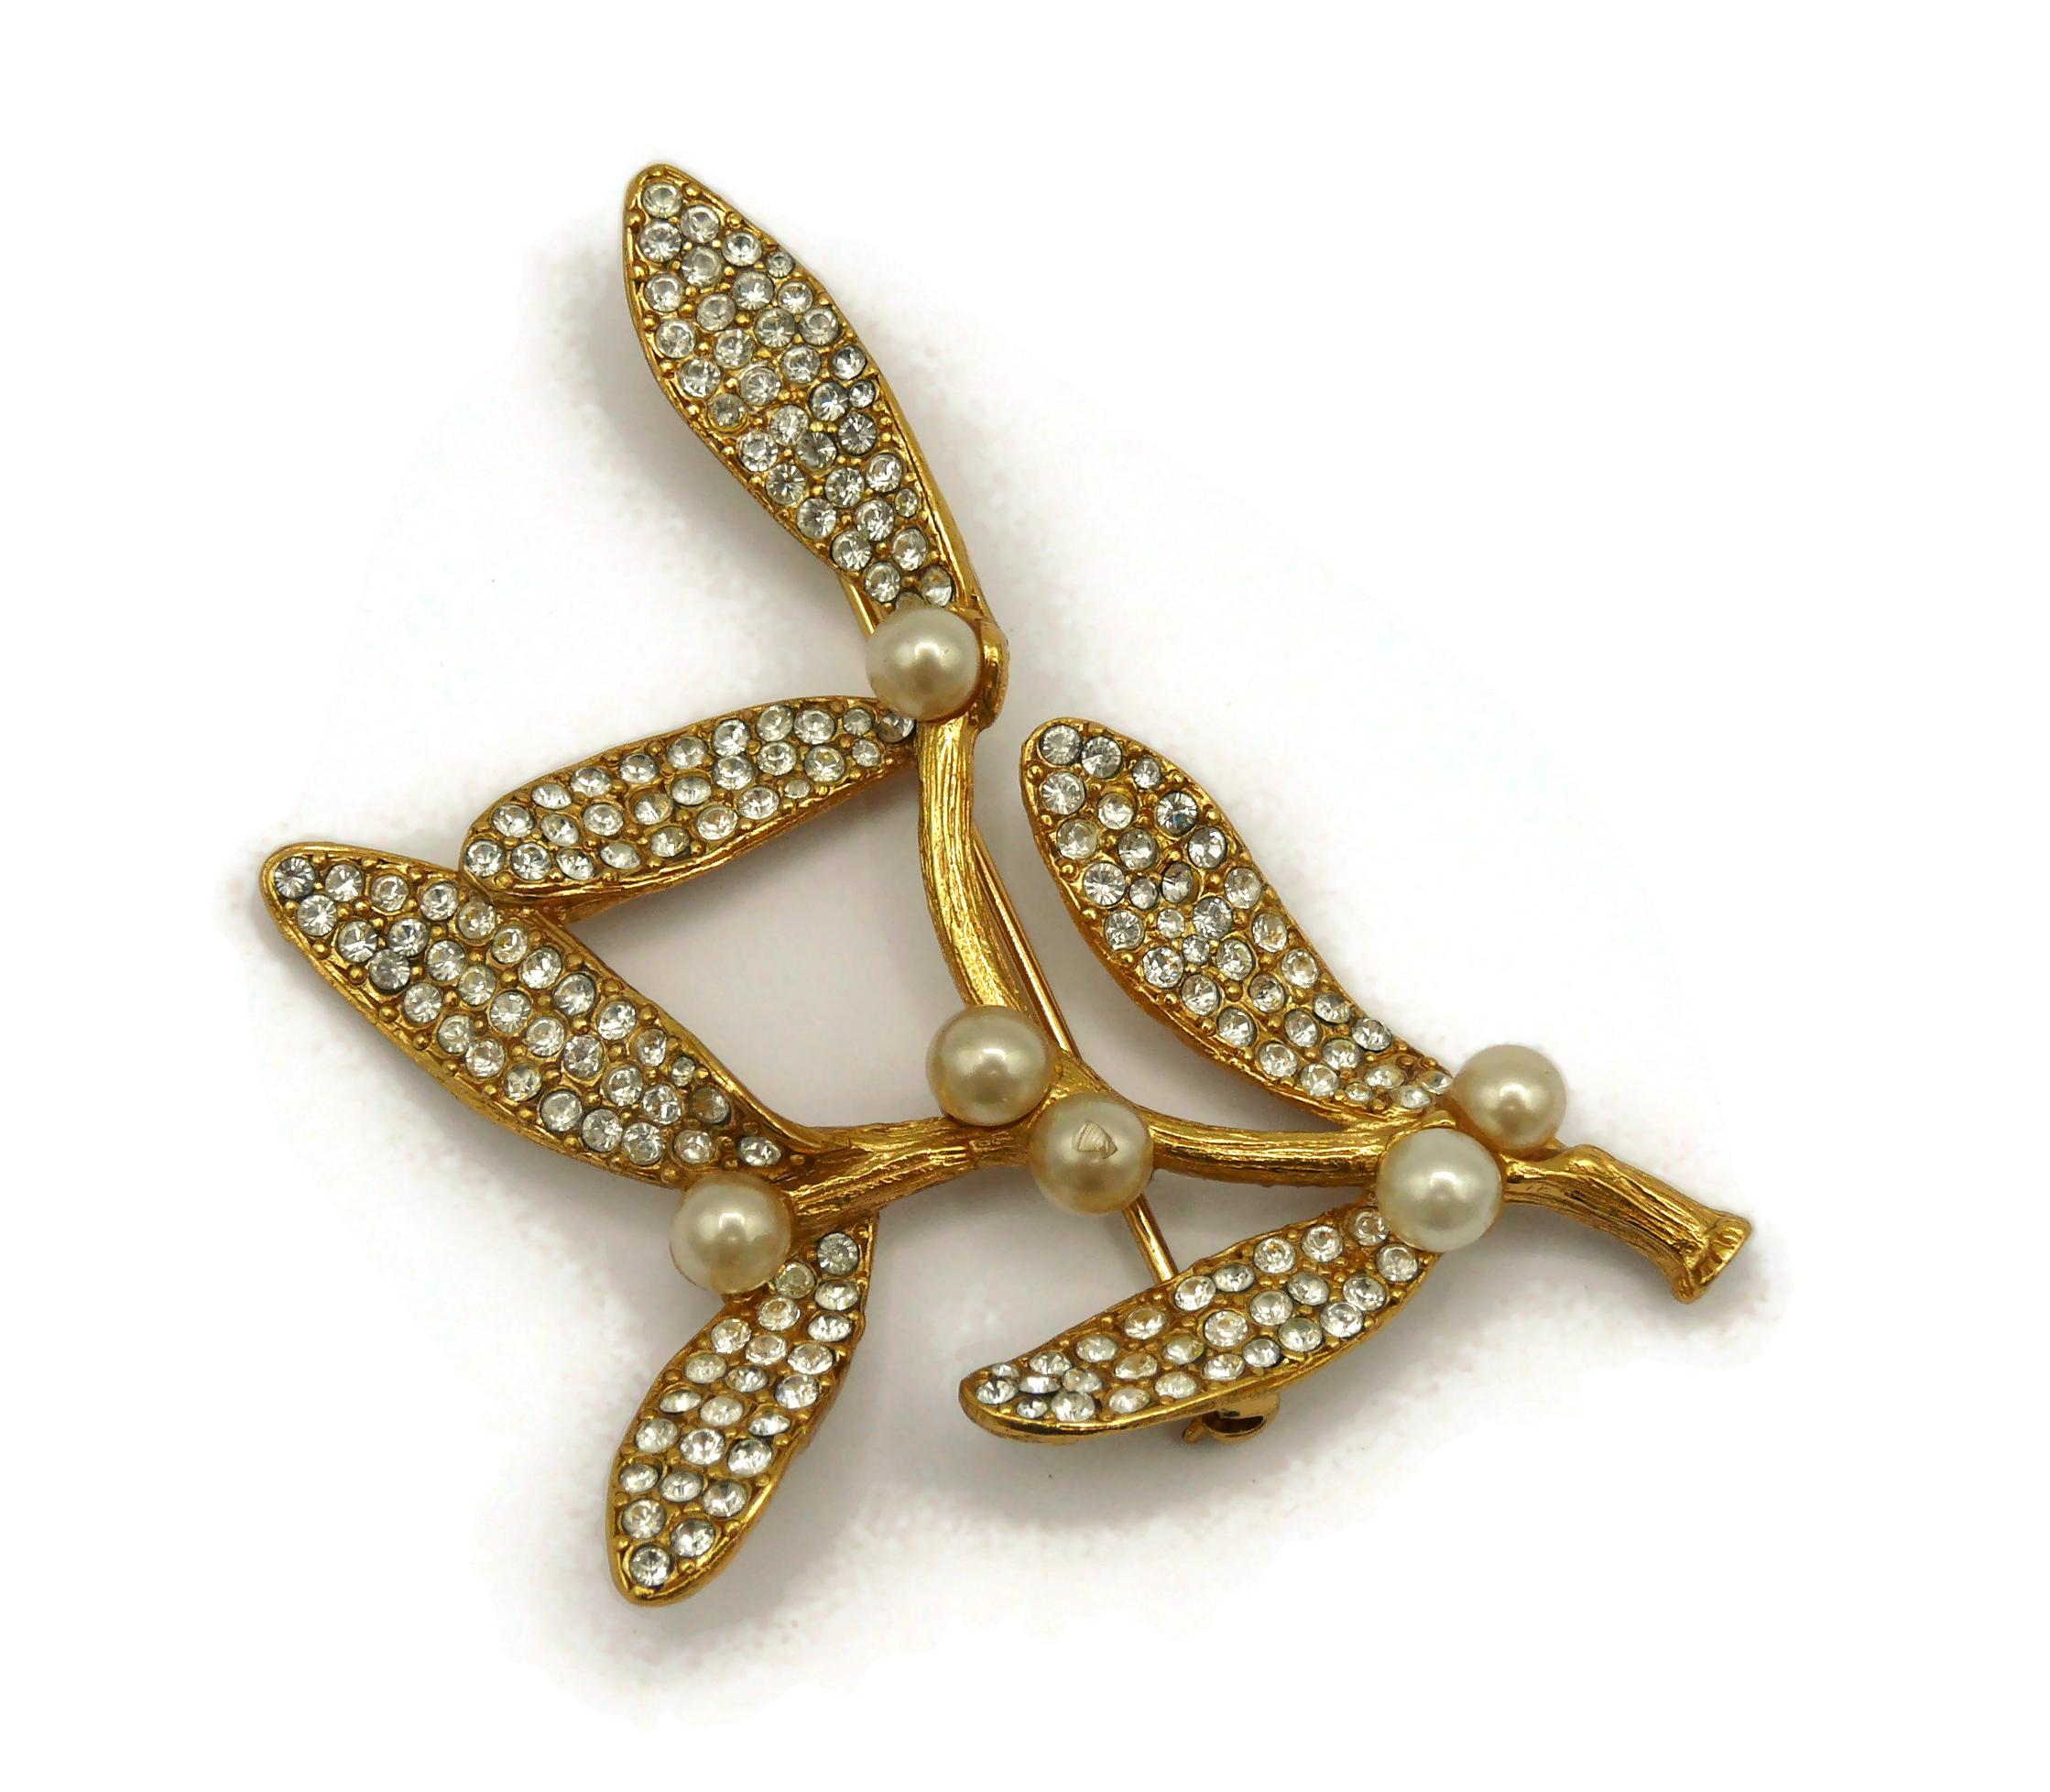 KENZO Vintage Jewelled Gold Tone Holly Brooch 1